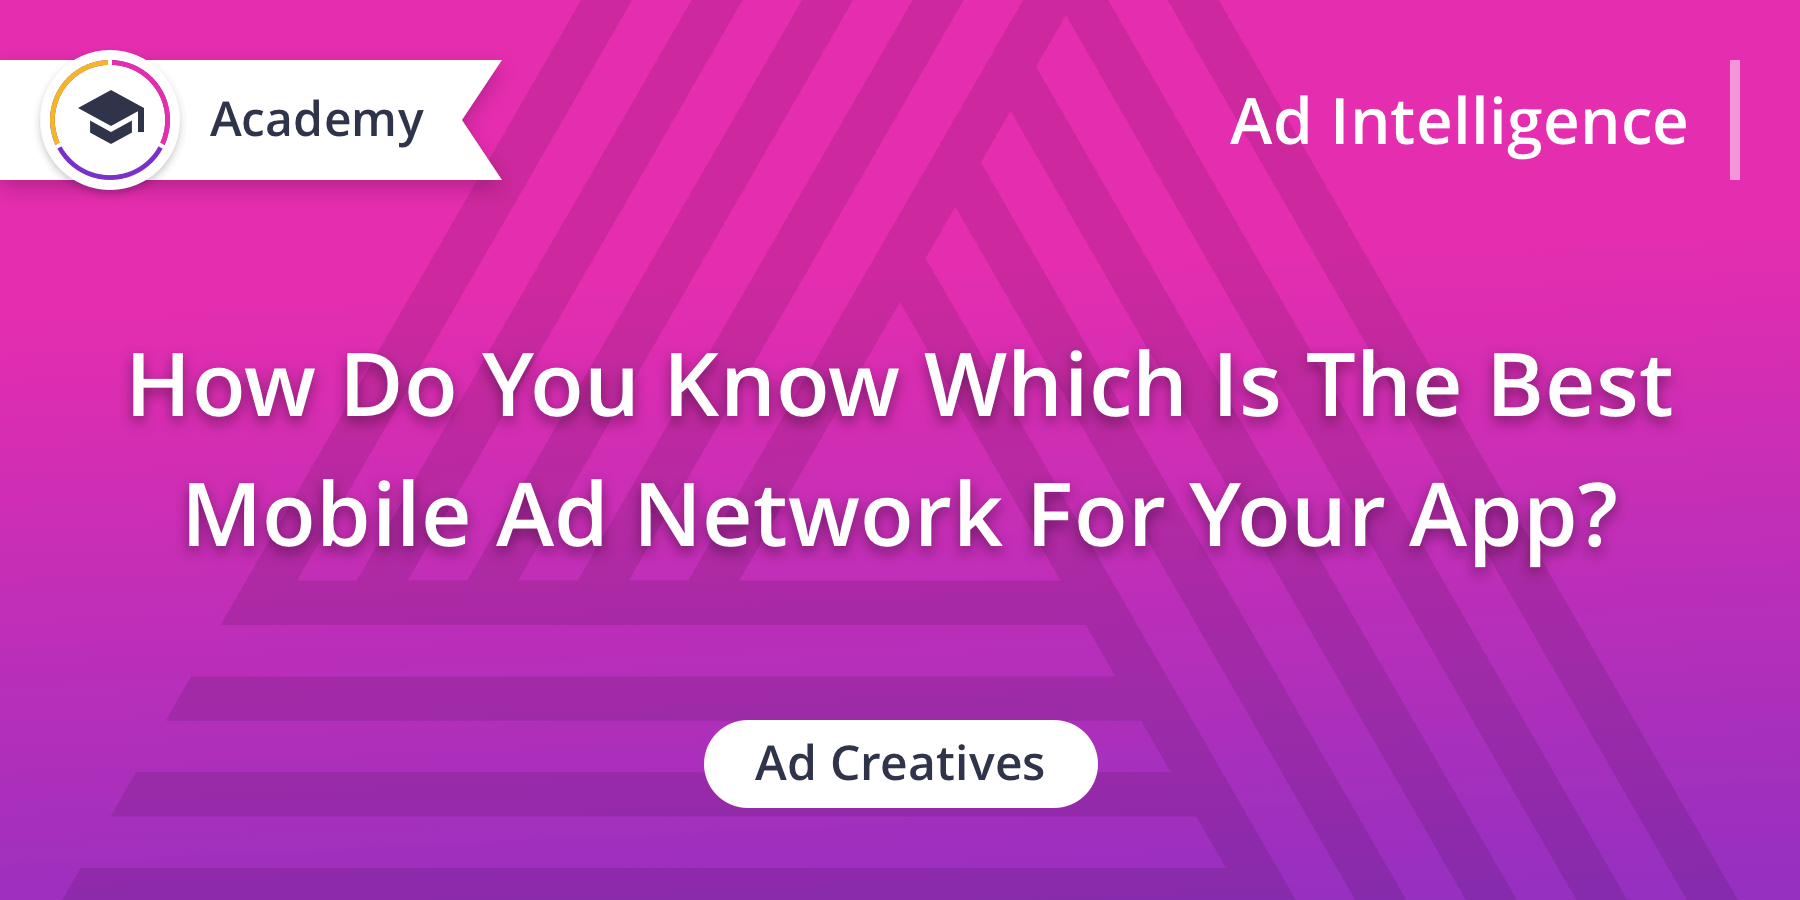 How Do You Know Which Is The Best Mobile Ad Network For Your App?